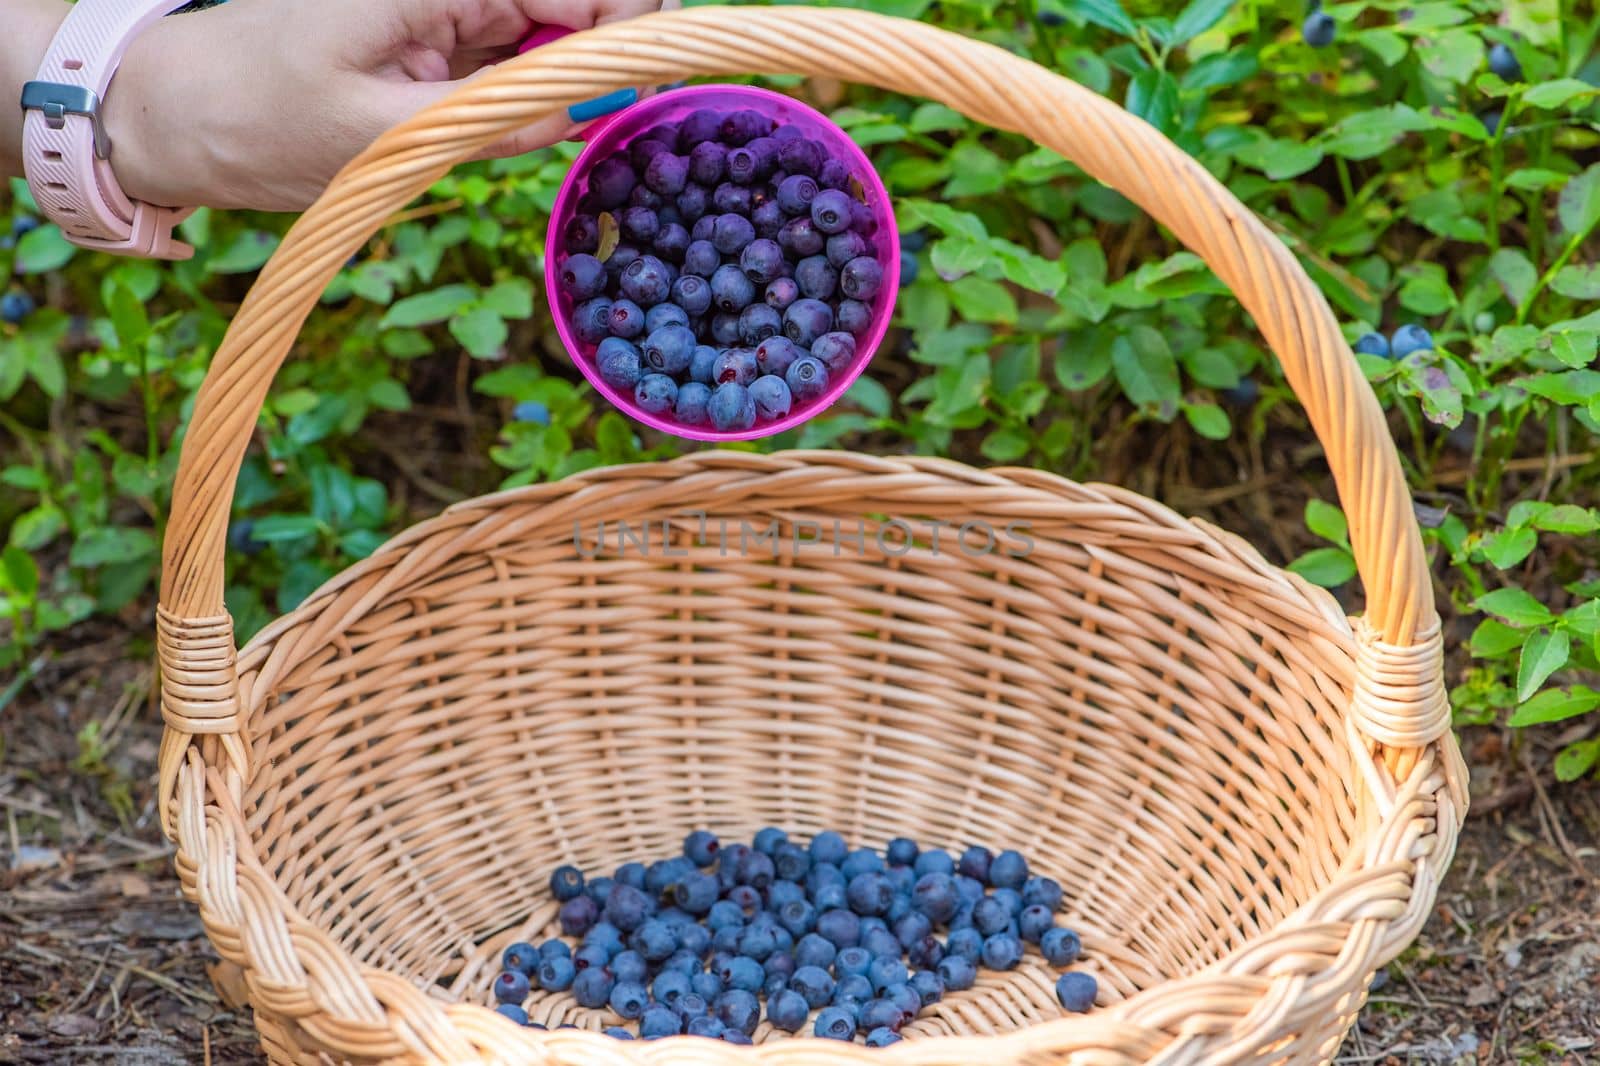 Blueberry picking season. Basket with ripe blueberries in the forest. A mug full of ripe juicy wild blueberries as a concept for picking summer berries in the forest.